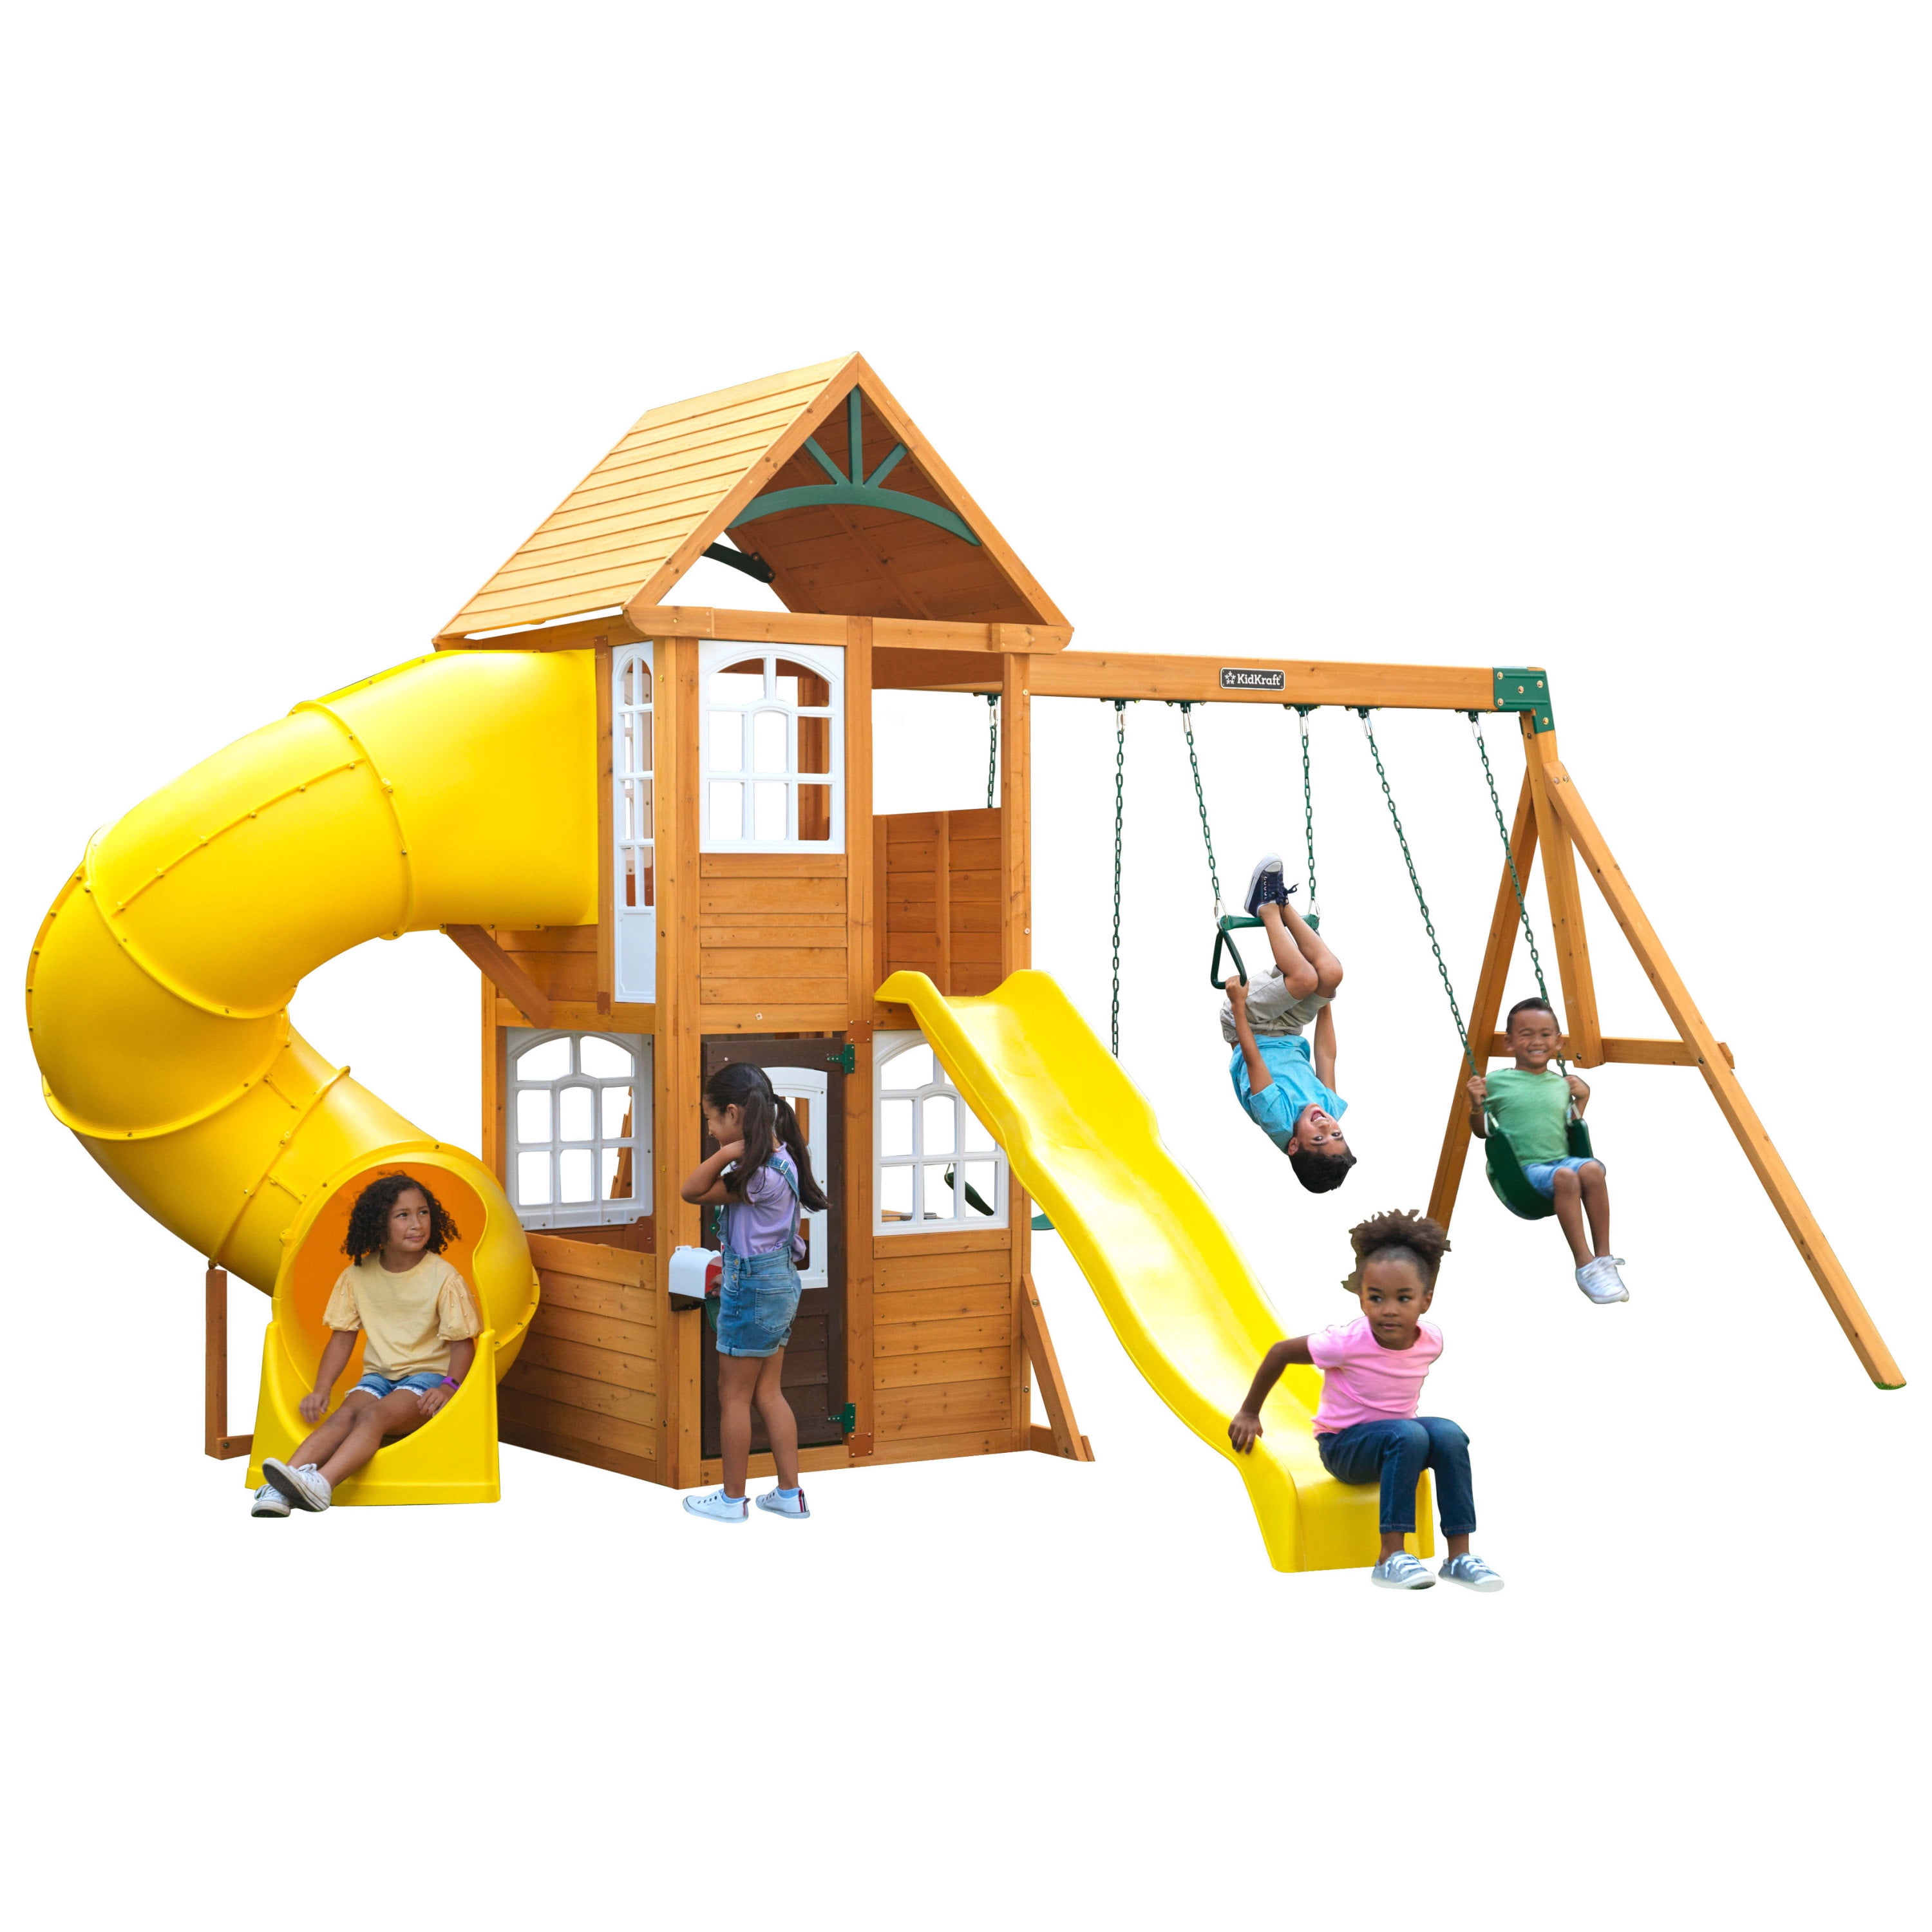 KidKraft Castlewood Wooden Swing Set / Playset with Clubhouse, Mailbox, Slide and Play Kitchen